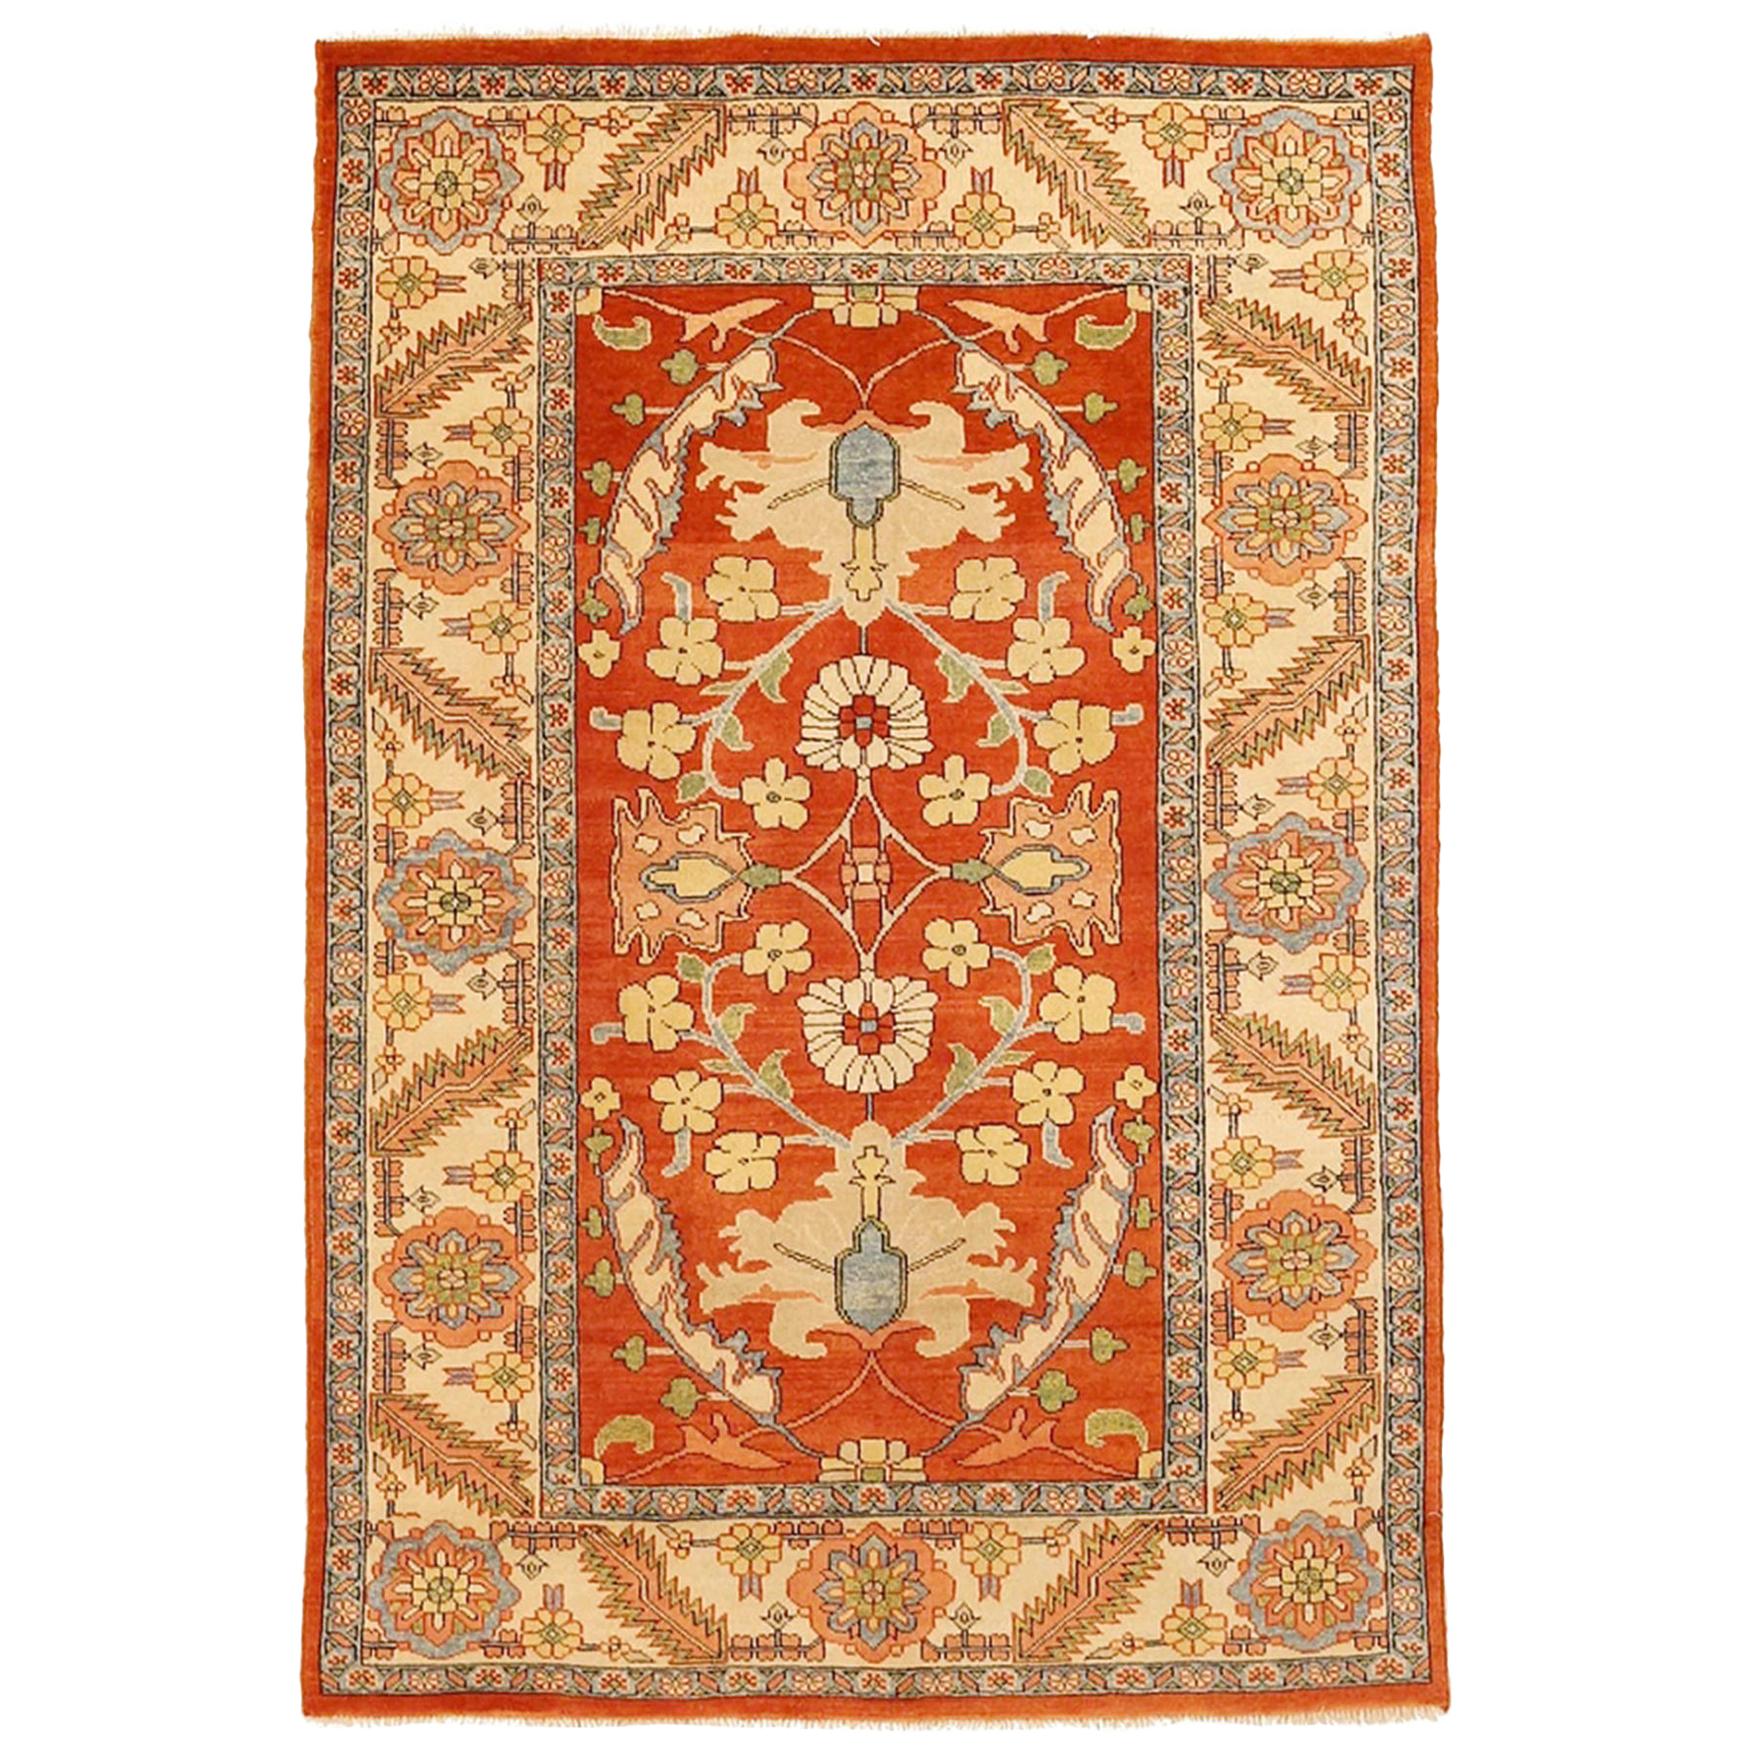 Vintage Persian Heriz Rug with Gray and Beige Floral Details on Red Center Field